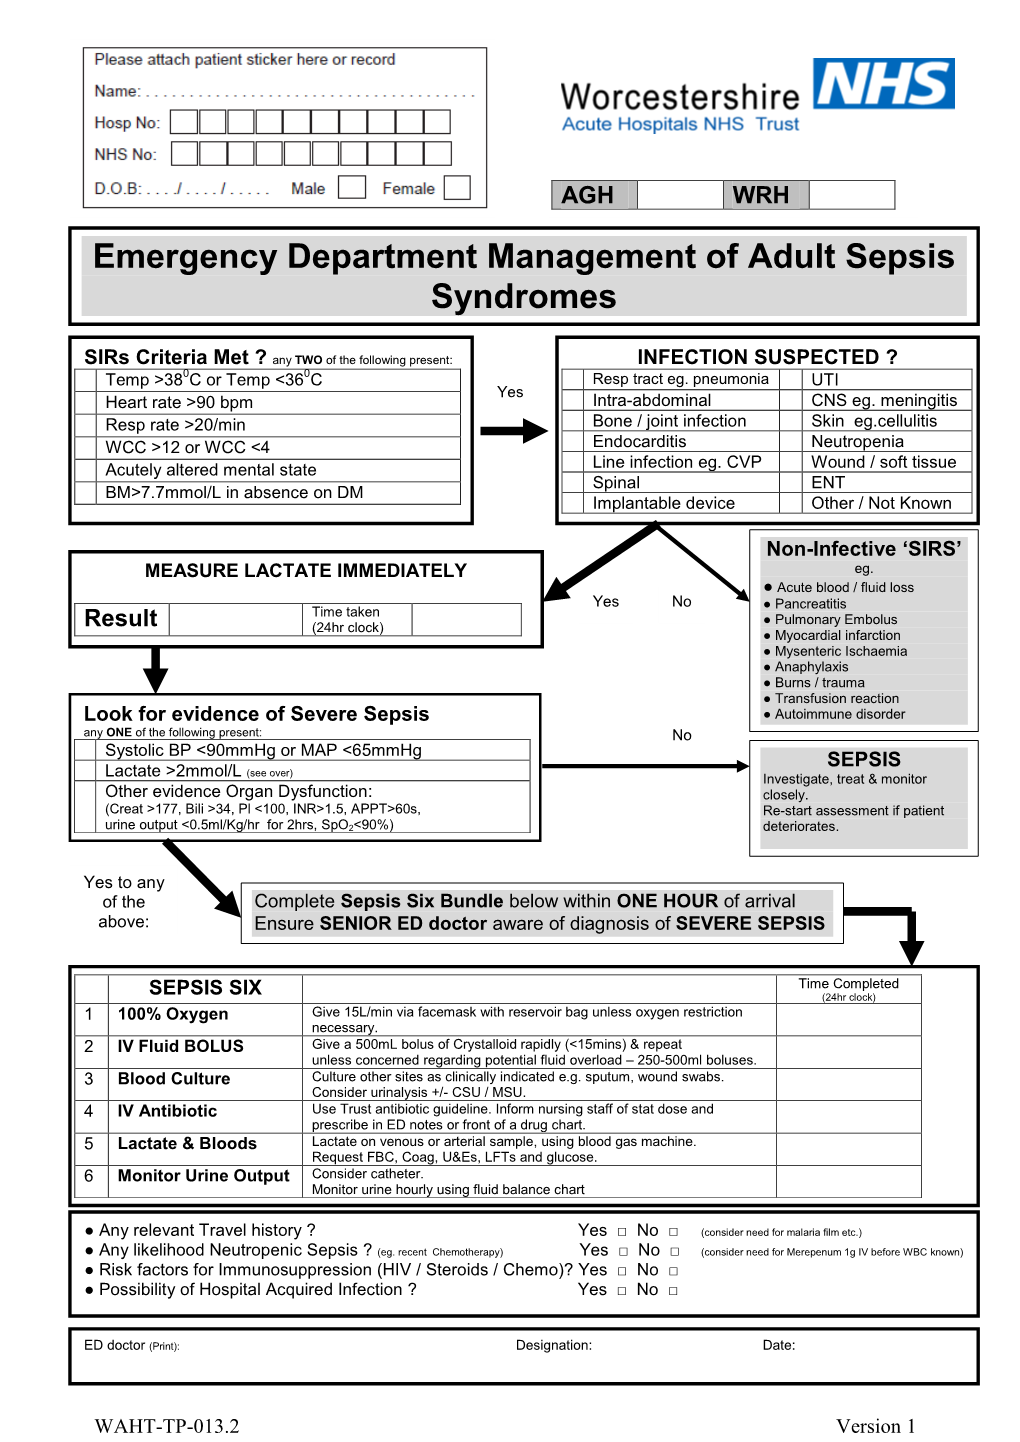 Emergency Department Management of Adult Sepsis Syndromes